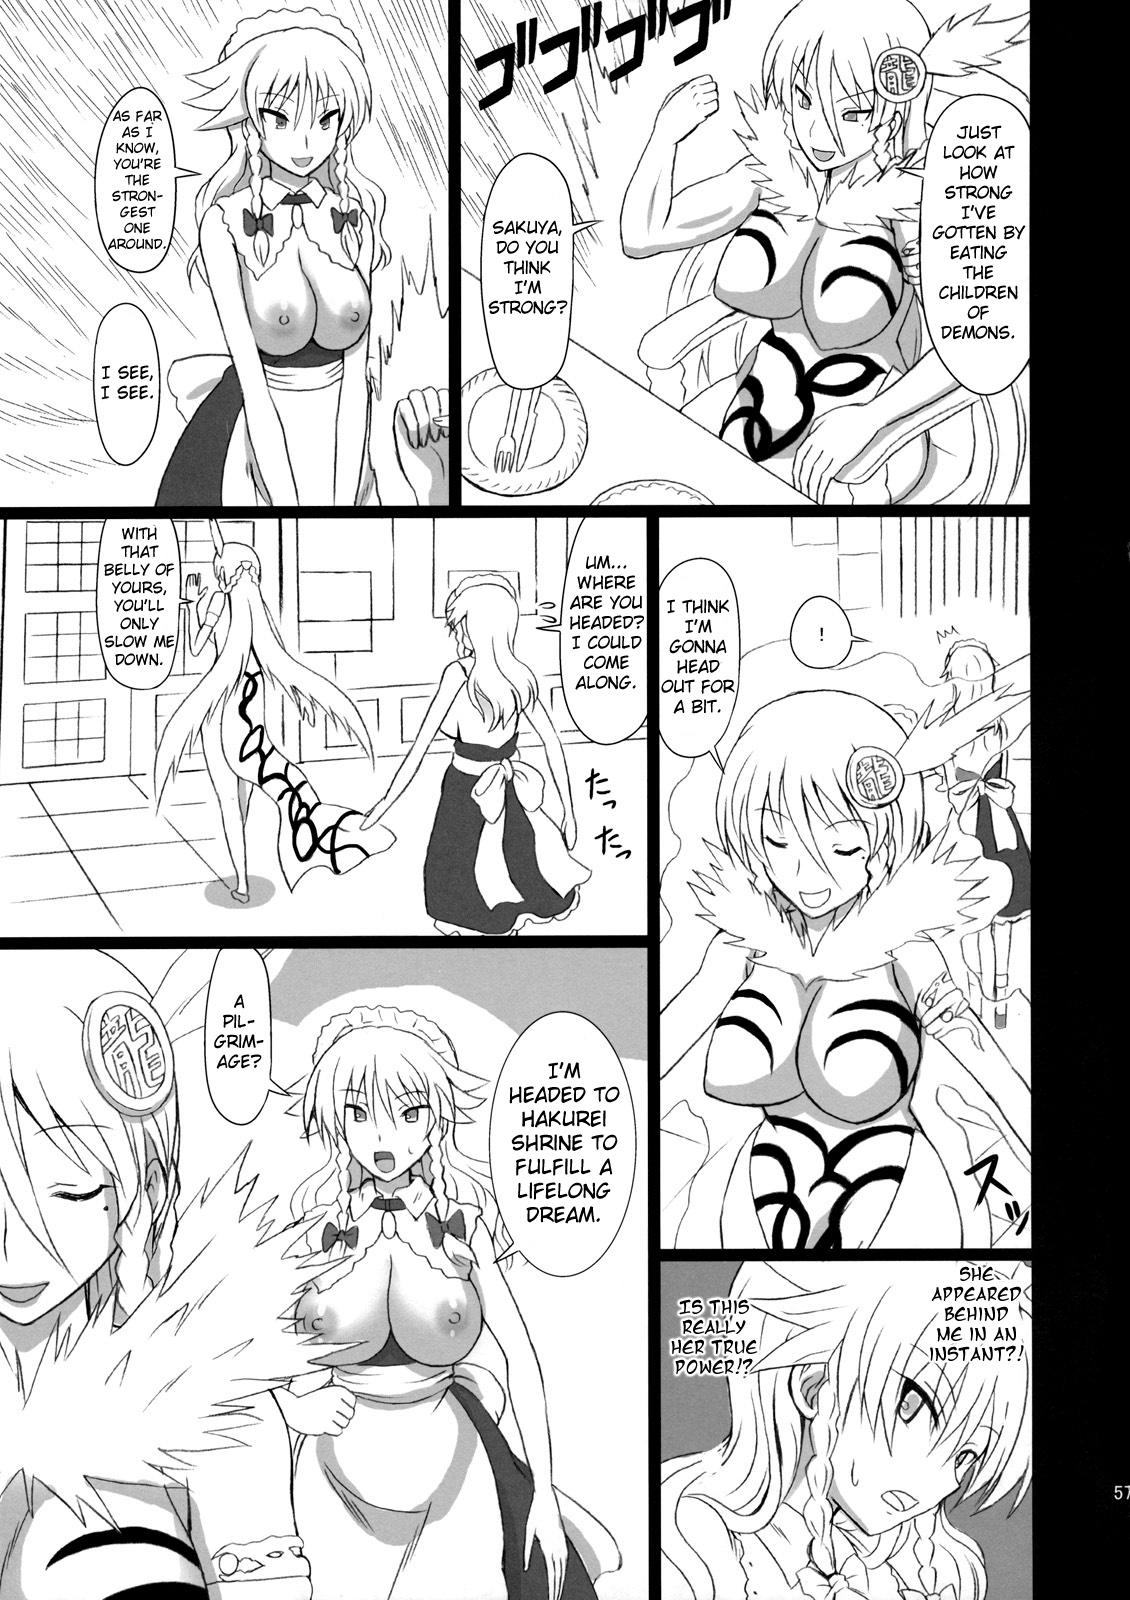 Toy Extend Party 3 - Touhou project Couple Fucking - Page 57